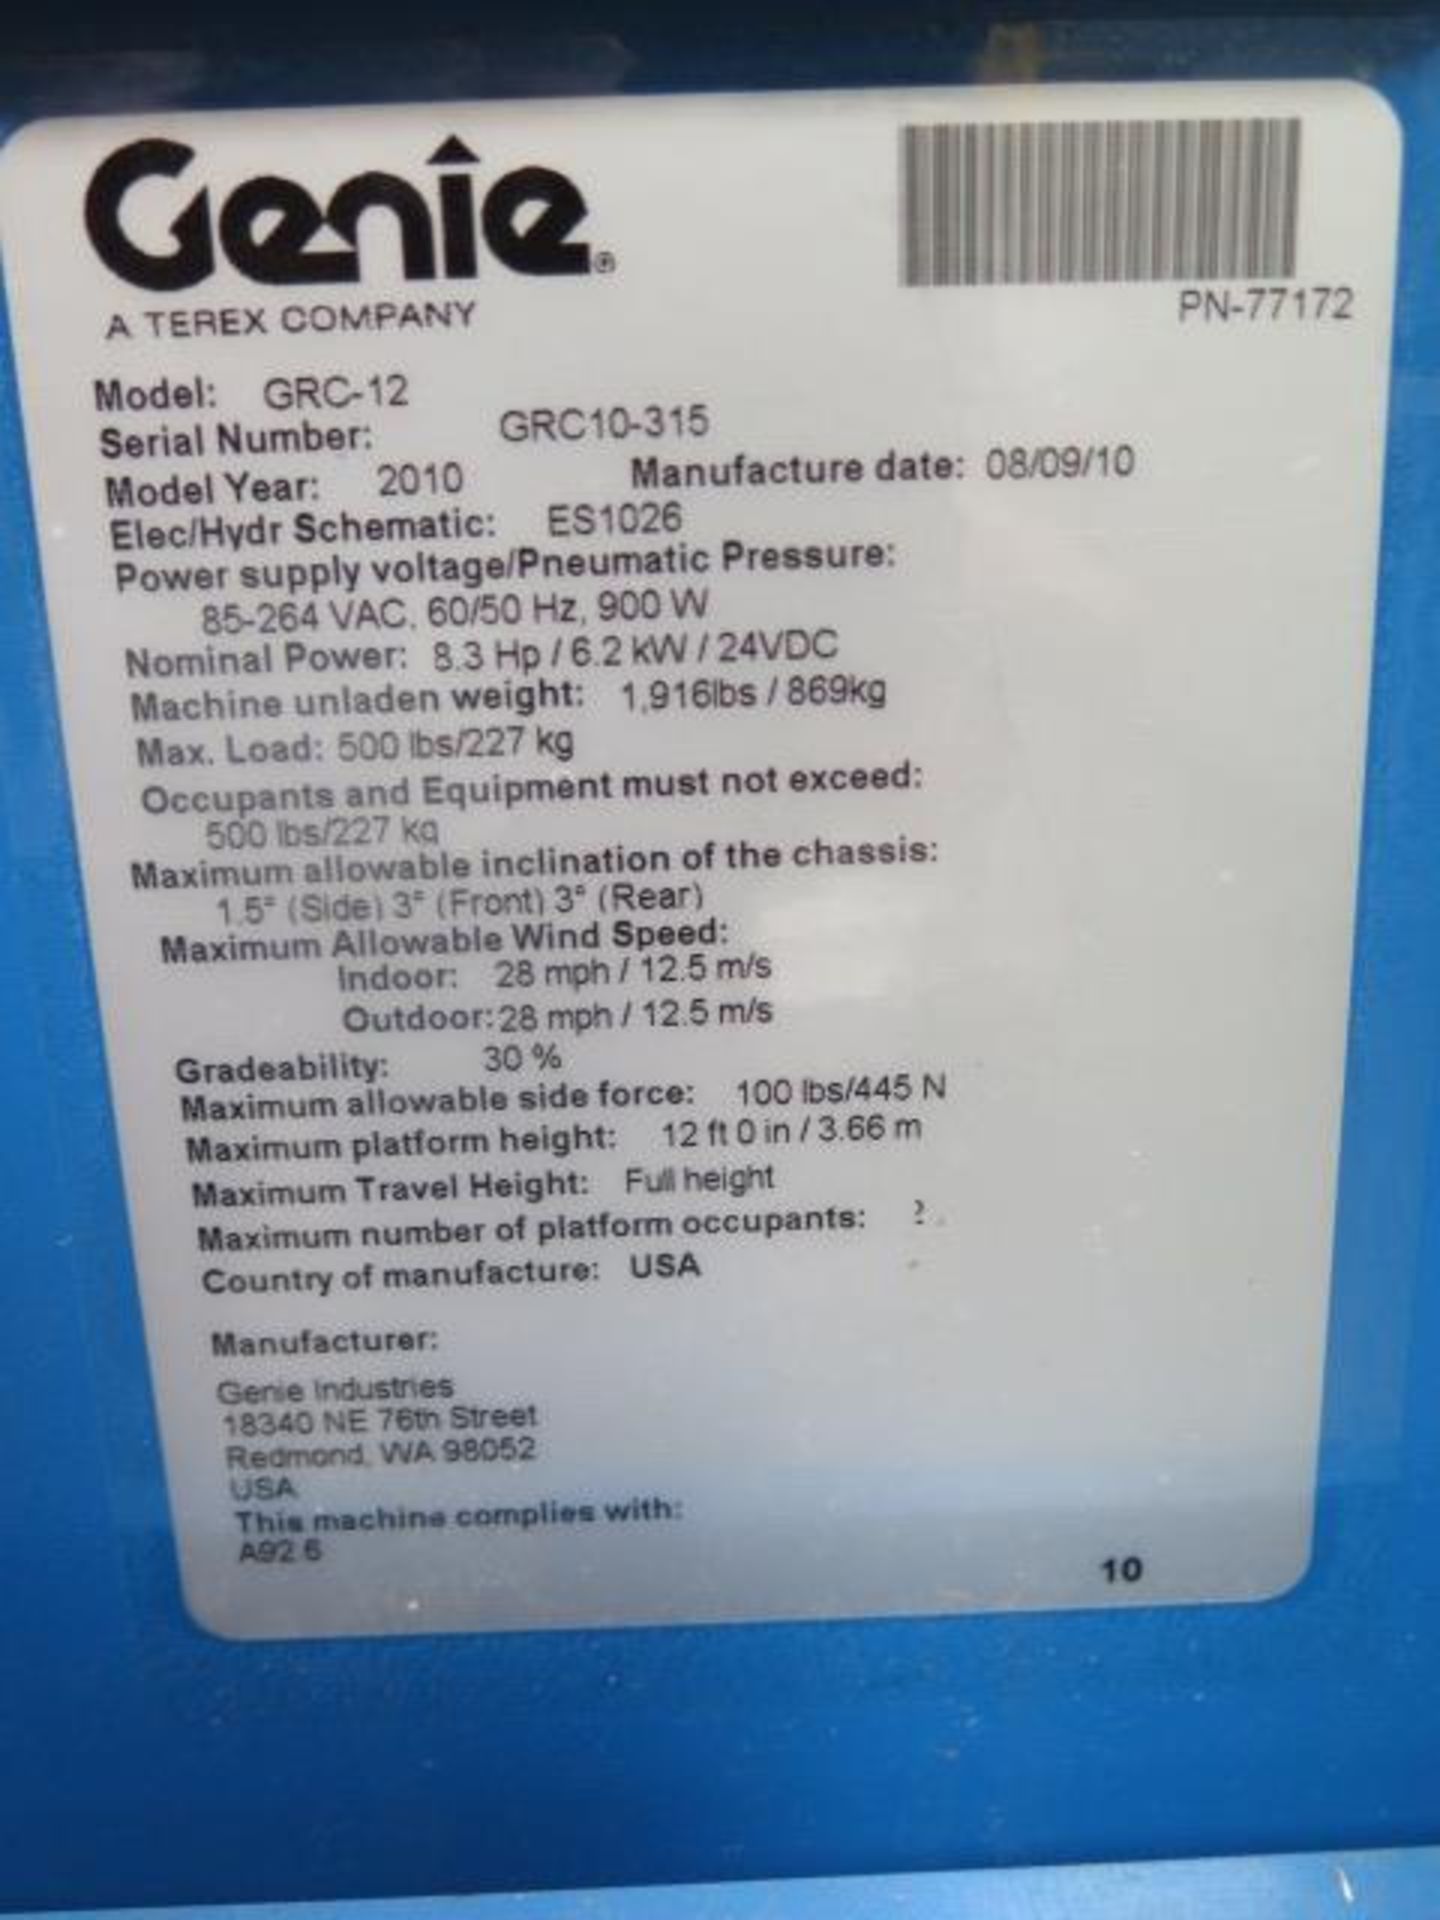 2010 Genie GRC-12 "Runabout Contractor" Electric Platform Lift s/n GRC10-315 w/ 12' Lift, SOLD AS IS - Image 14 of 14